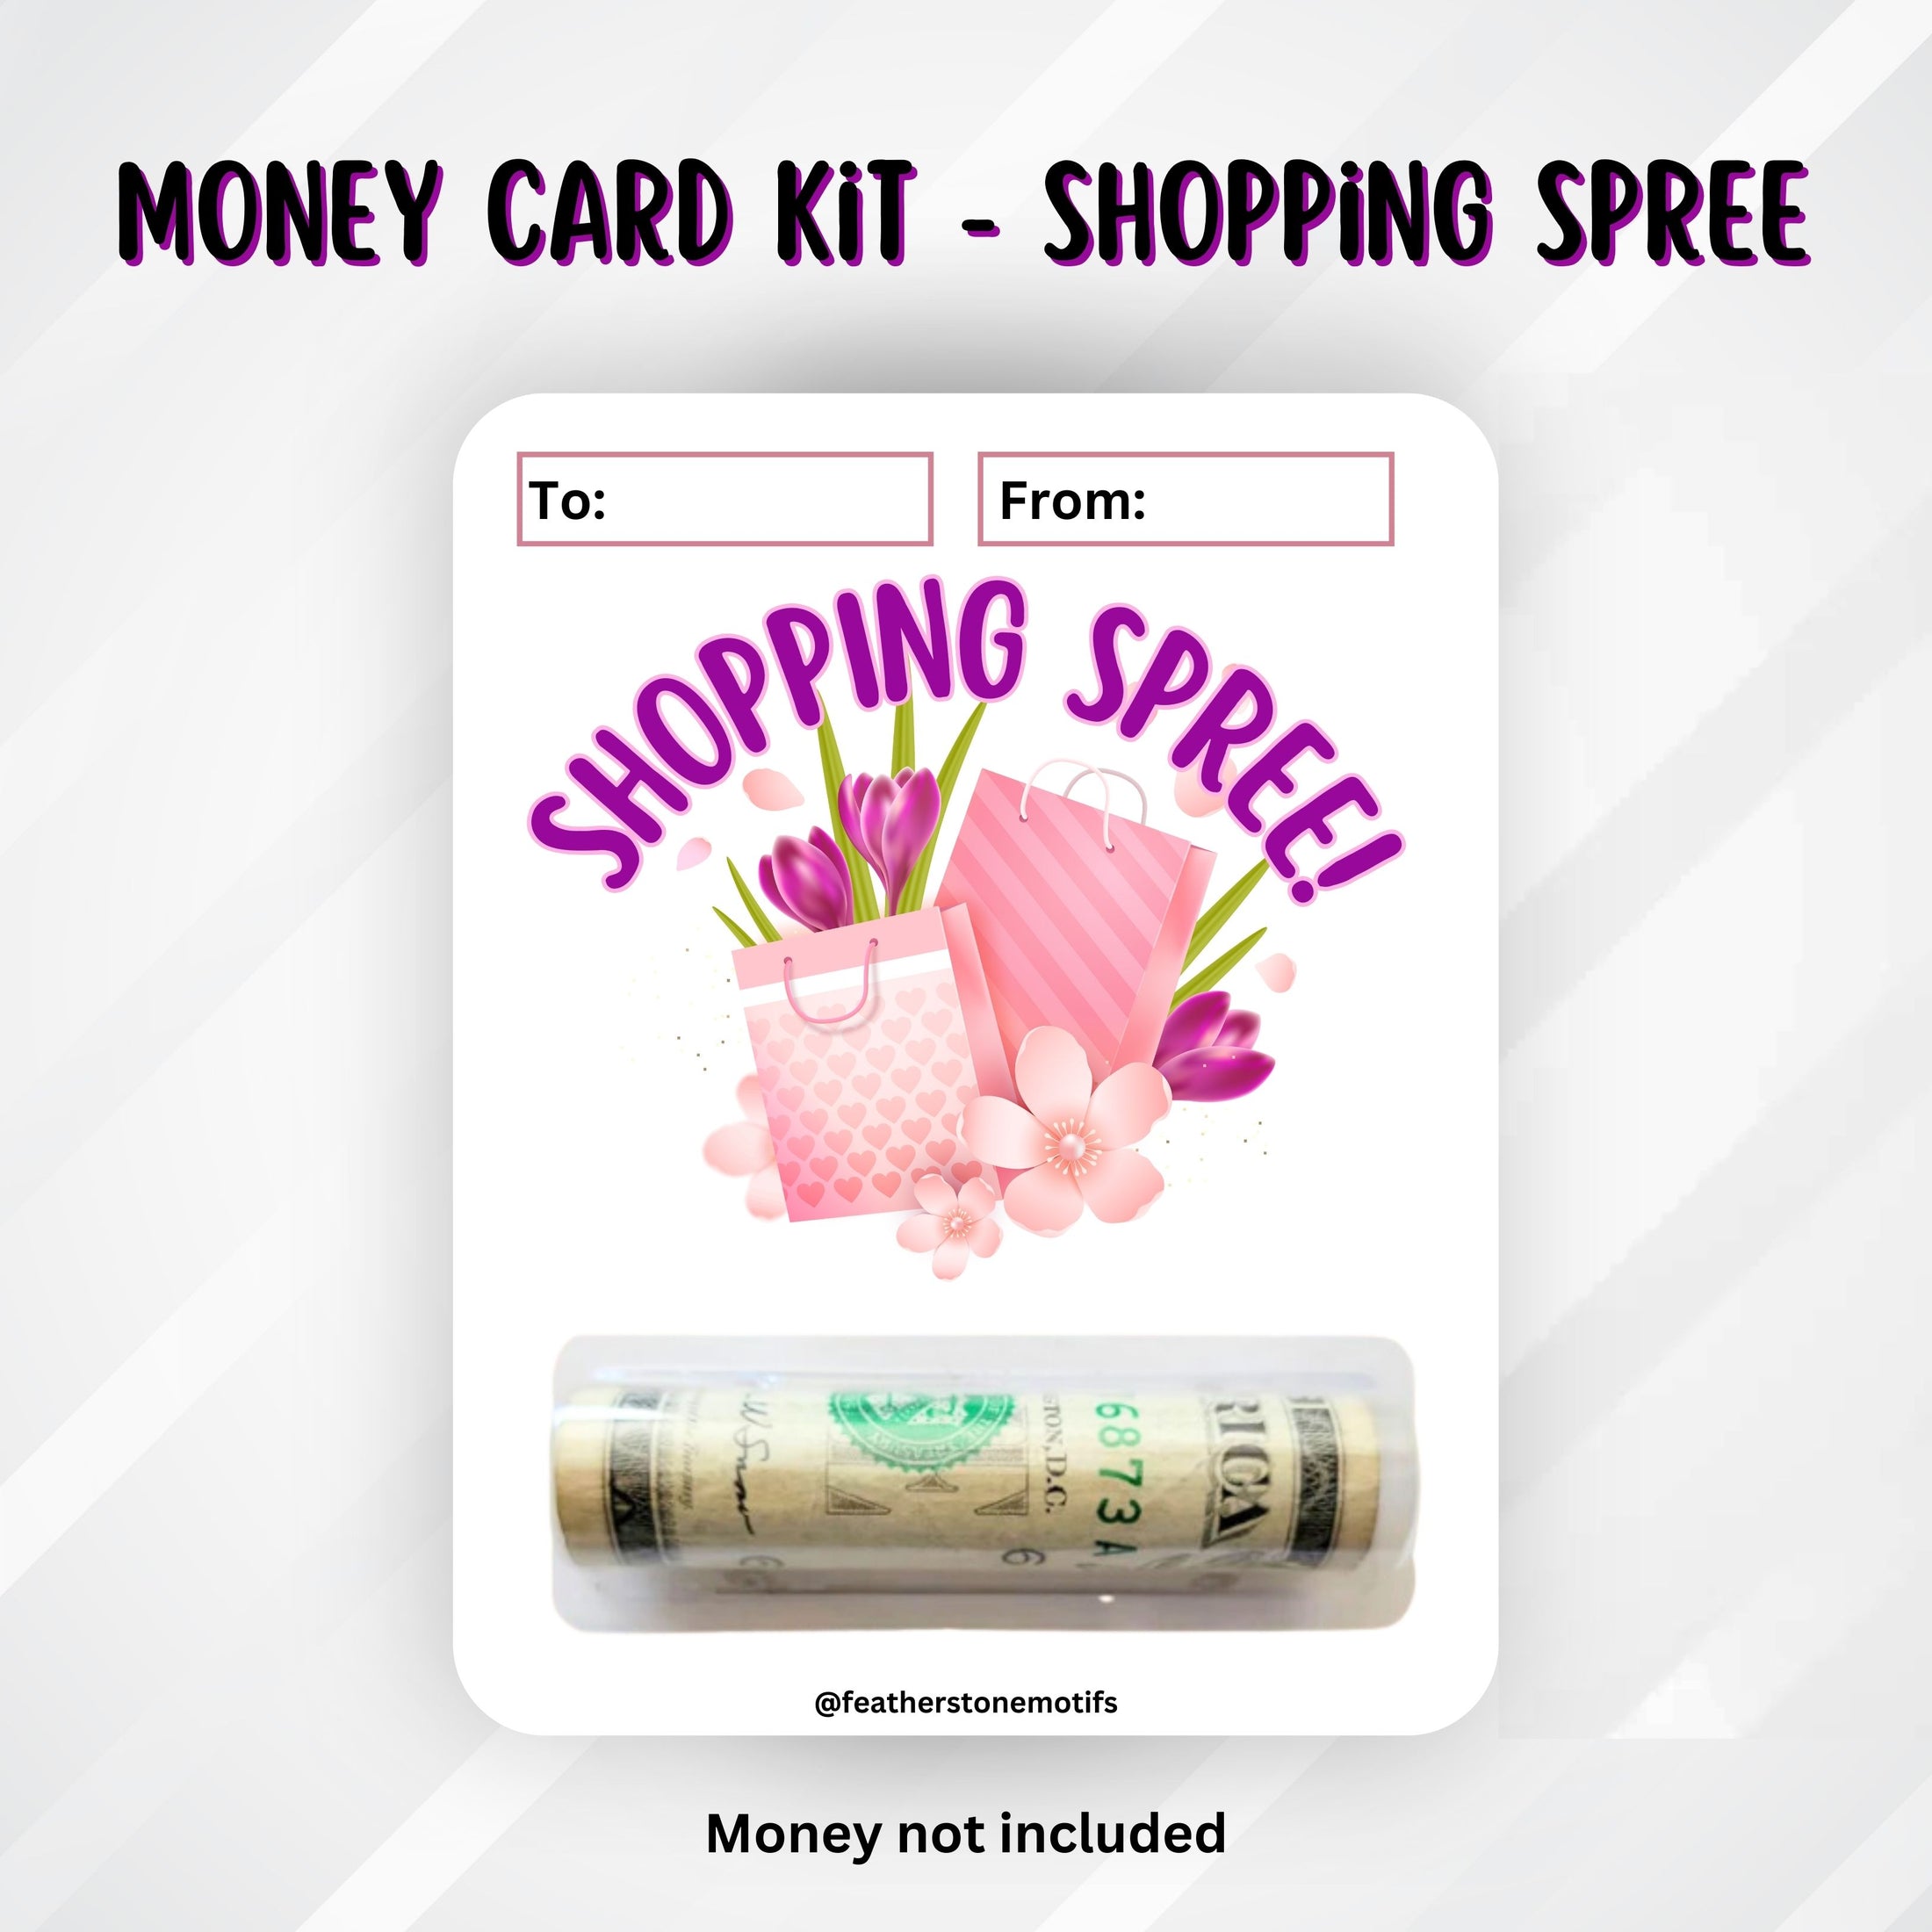 This image shows the money tube attached to the Shopping Spree Money Card.